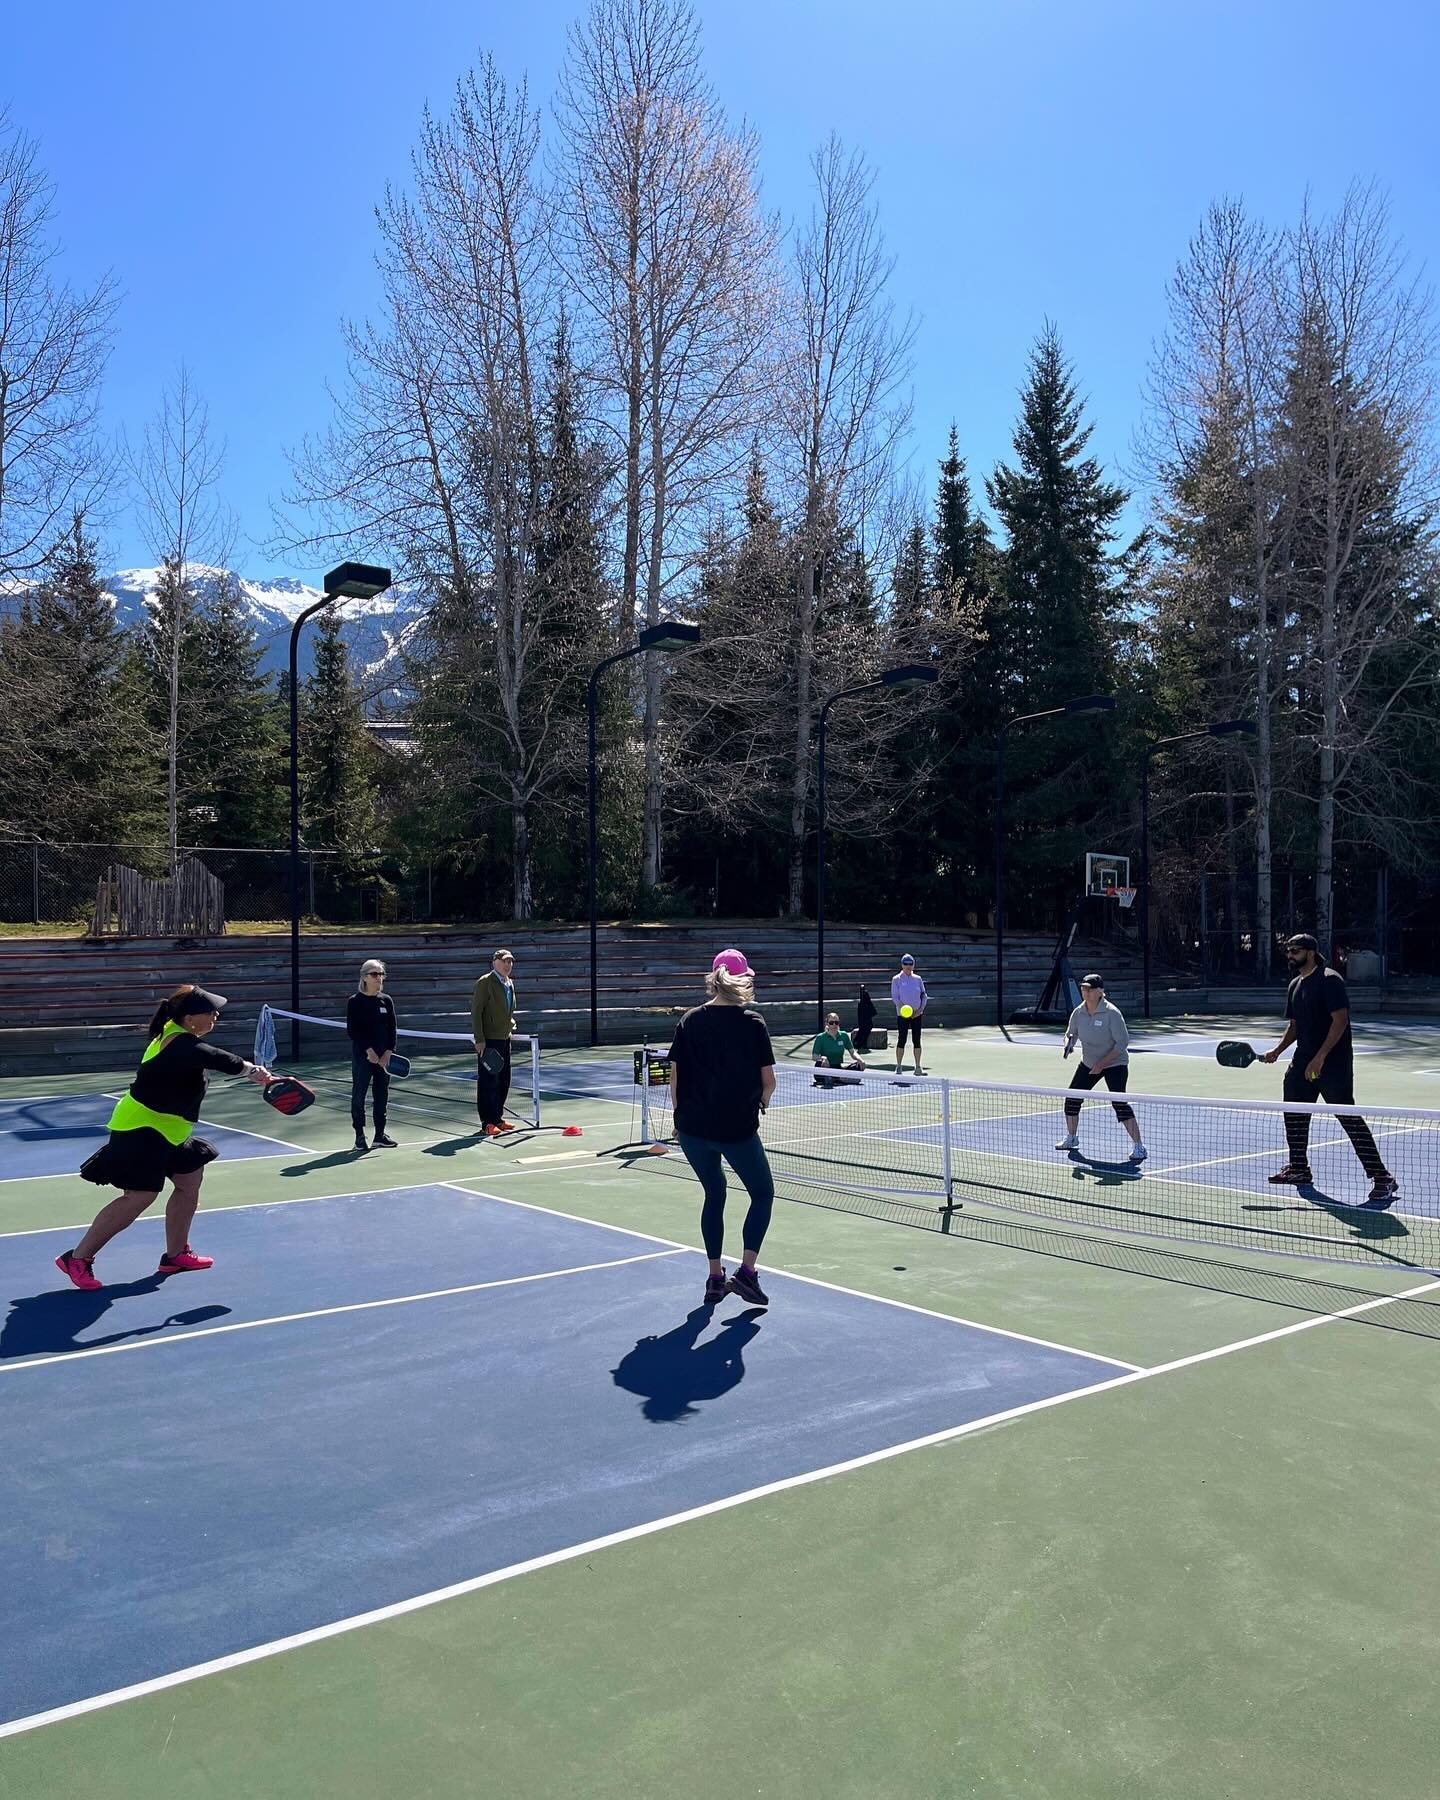 Pickleball 101 out on centre court this morning with Coach Gowtham + Suzanne!🌞